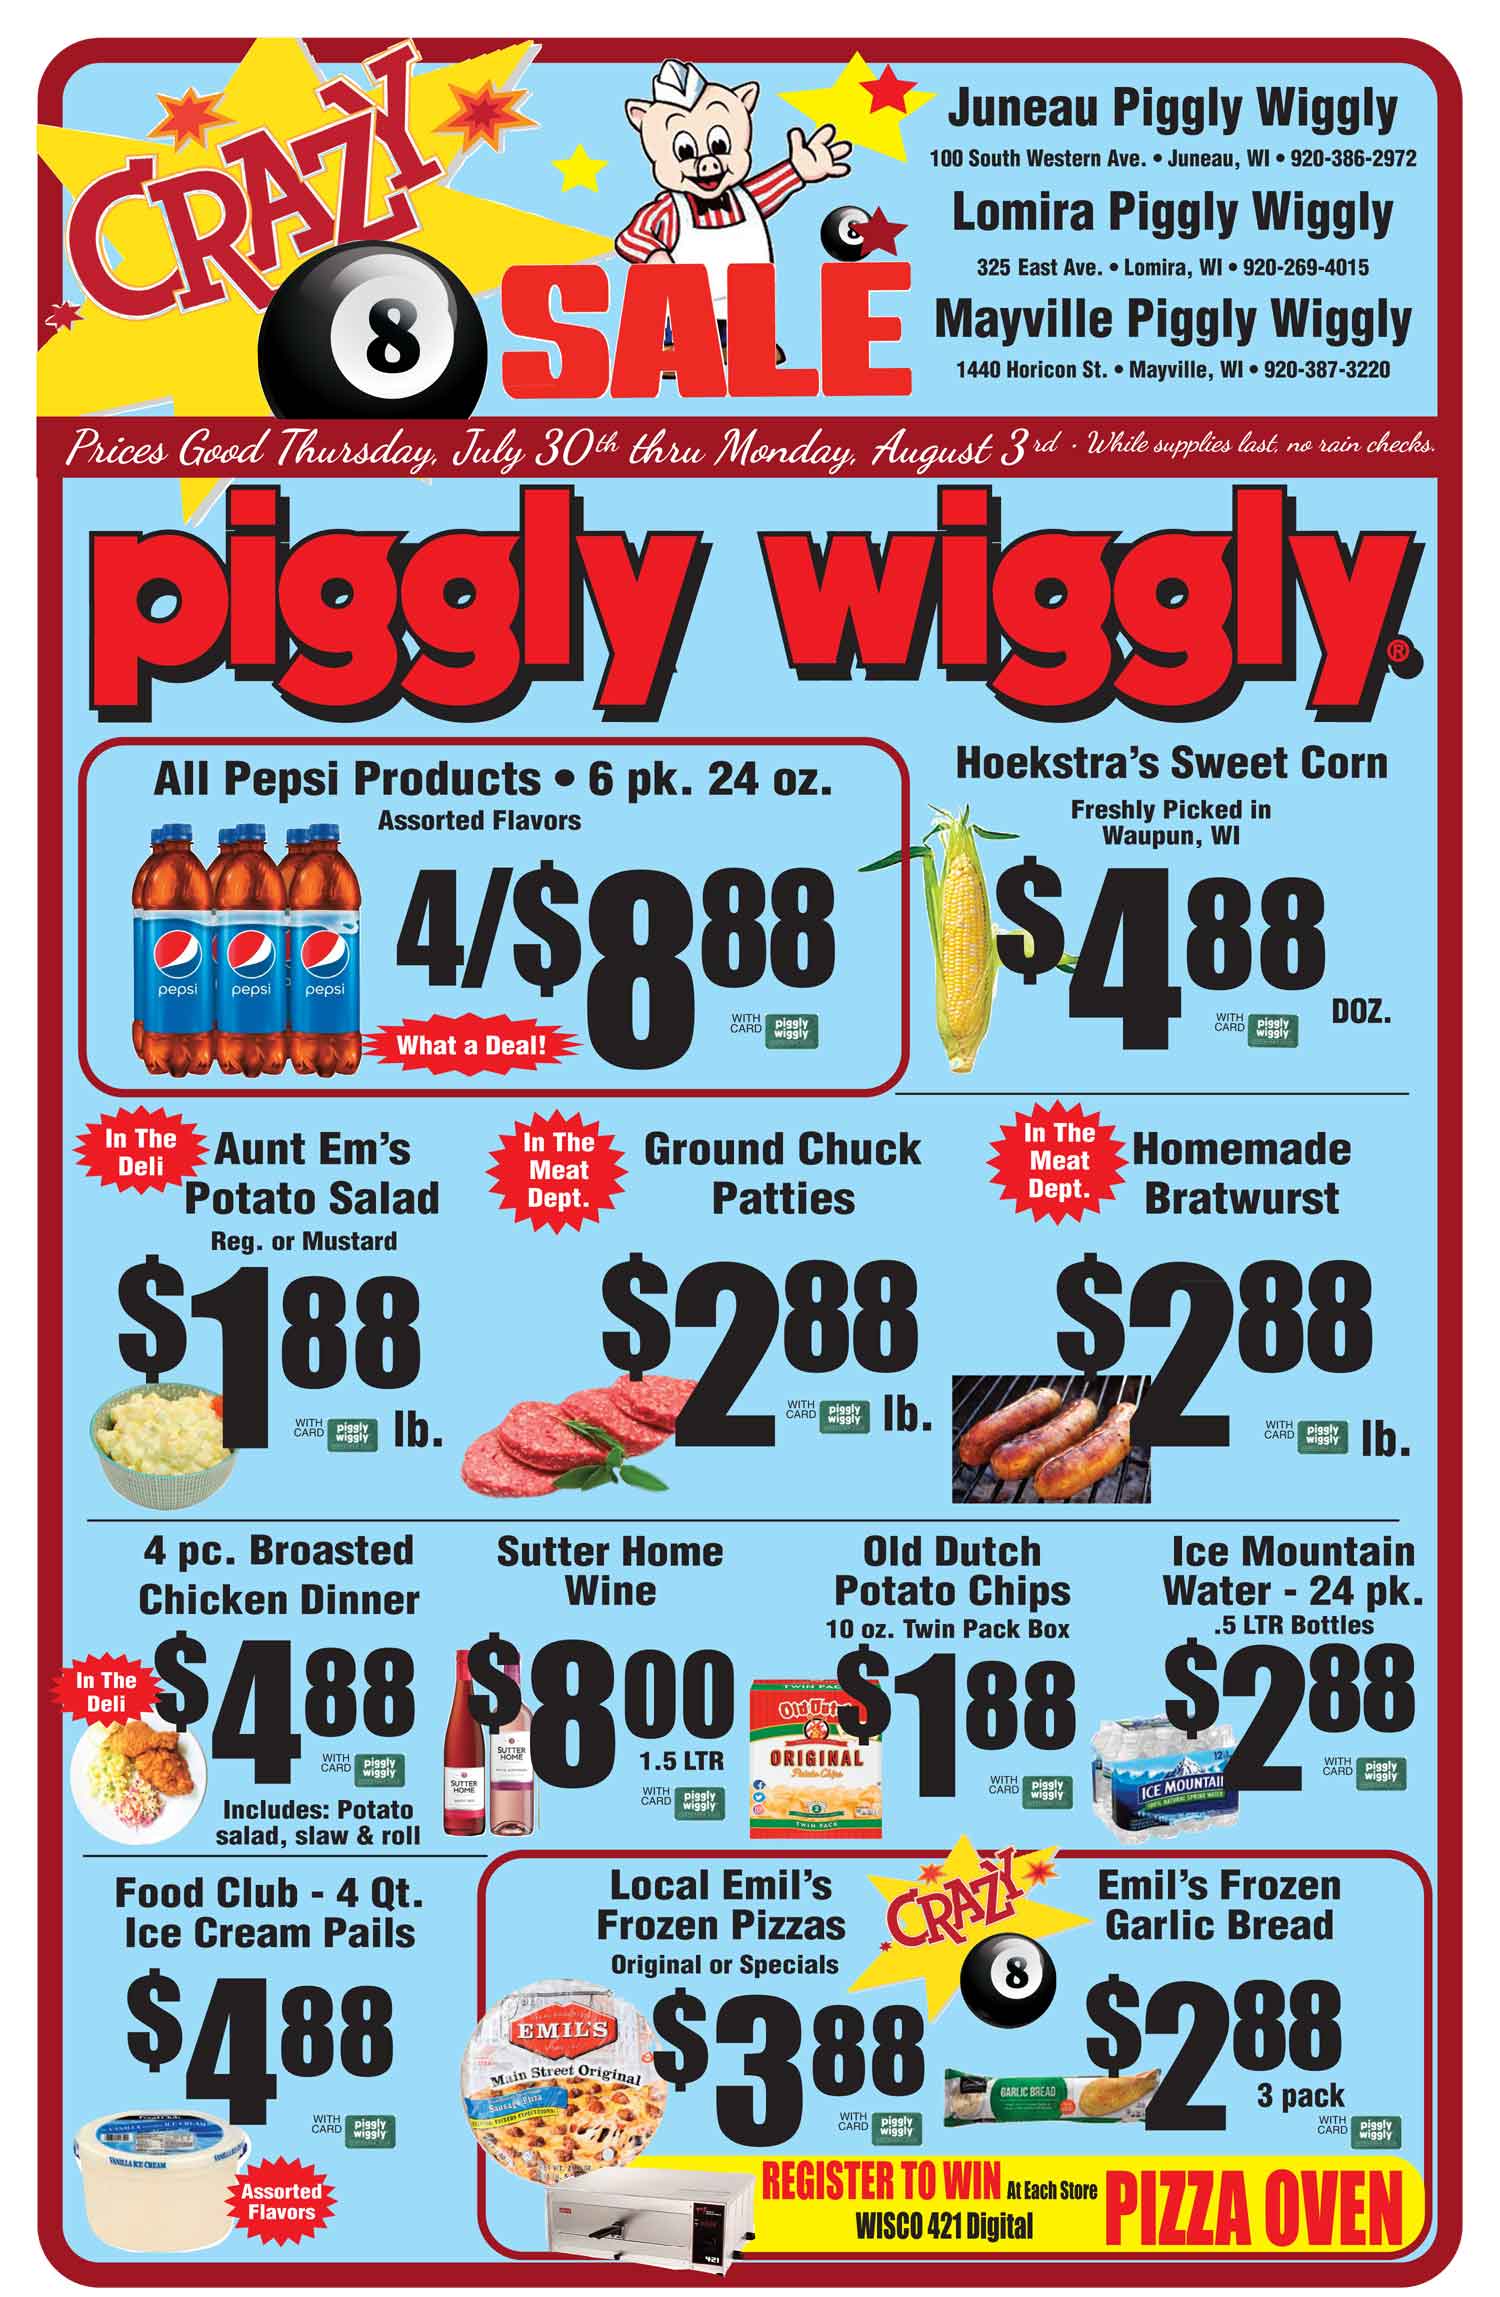 piggly wiggly sales ad this week